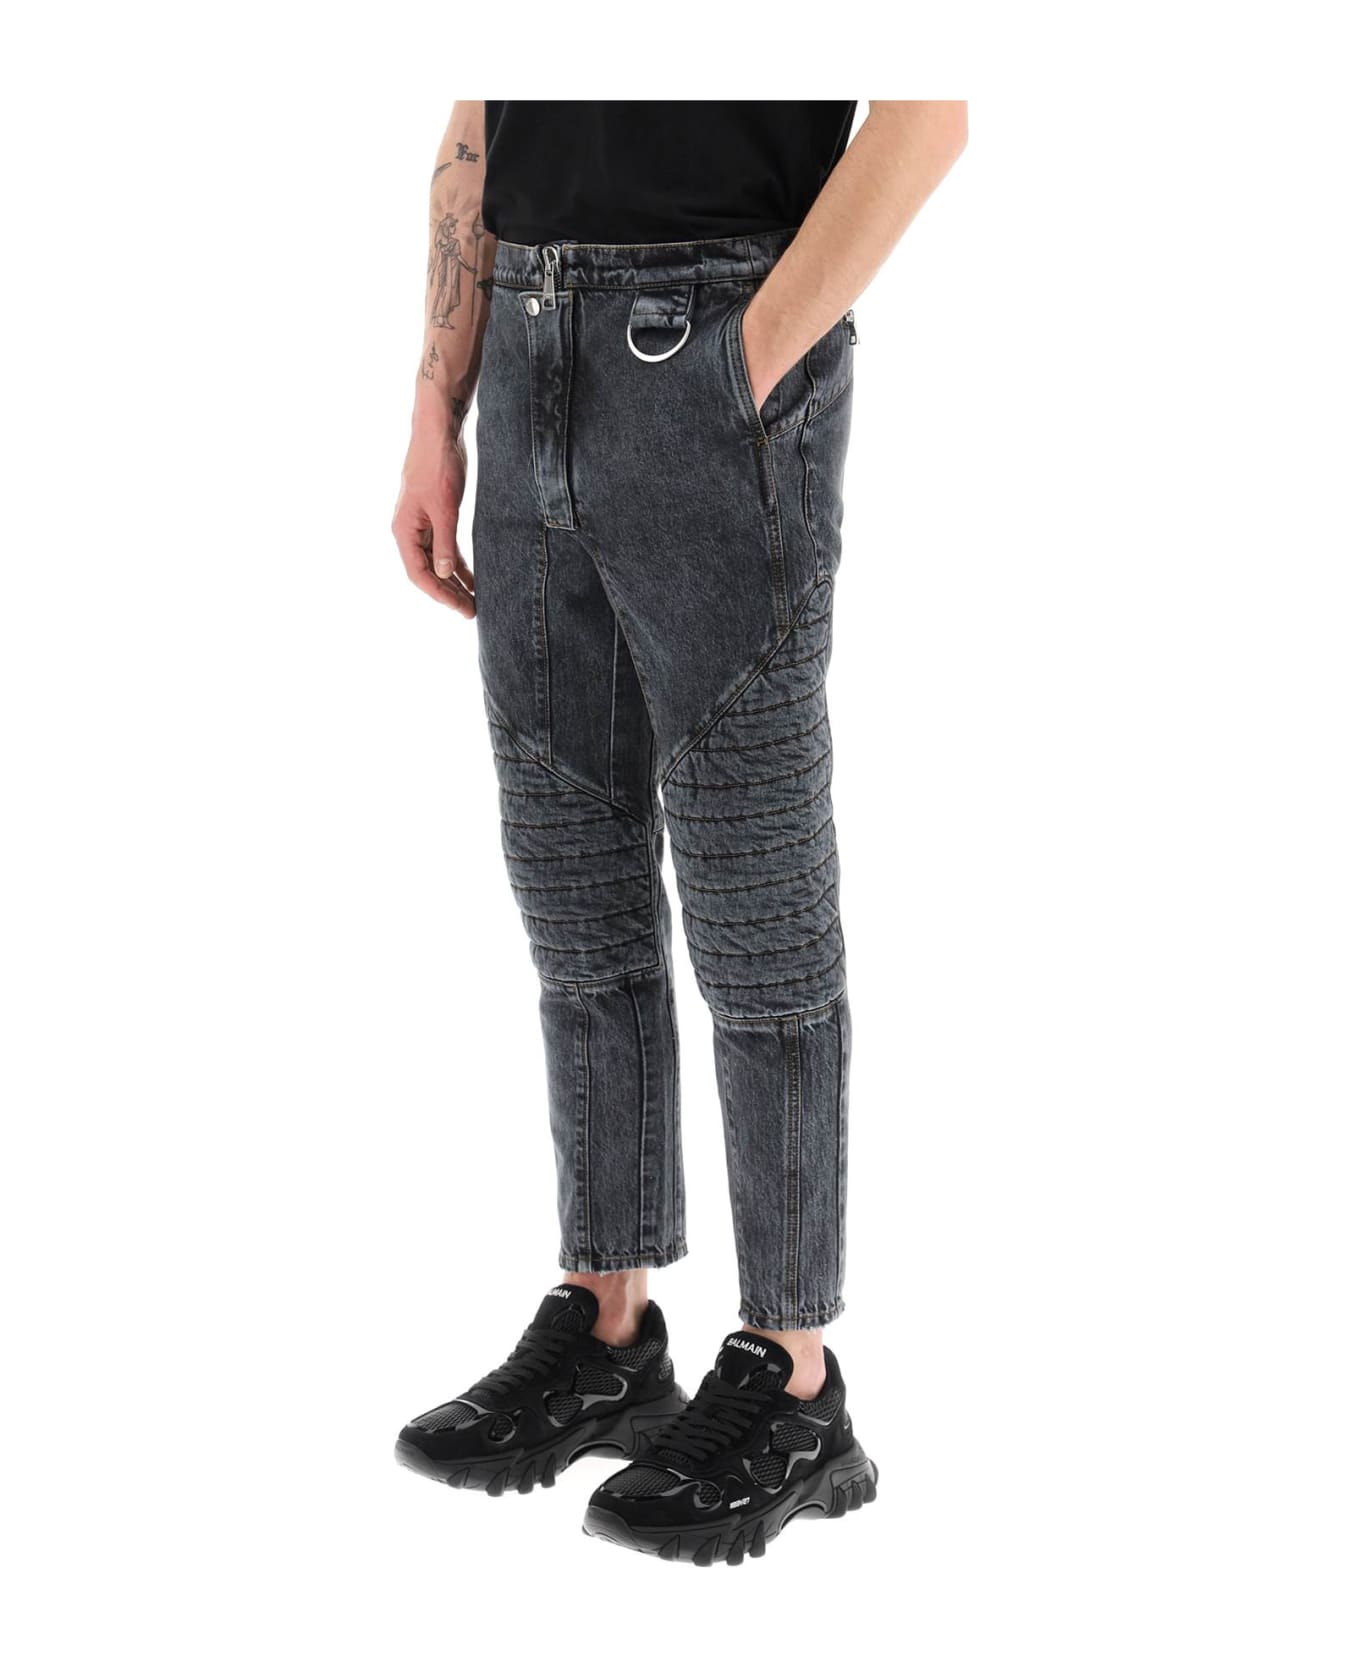 Balmain Jeans With Quilted And Padded Inserts - NOIR DELAVE (Grey) デニム